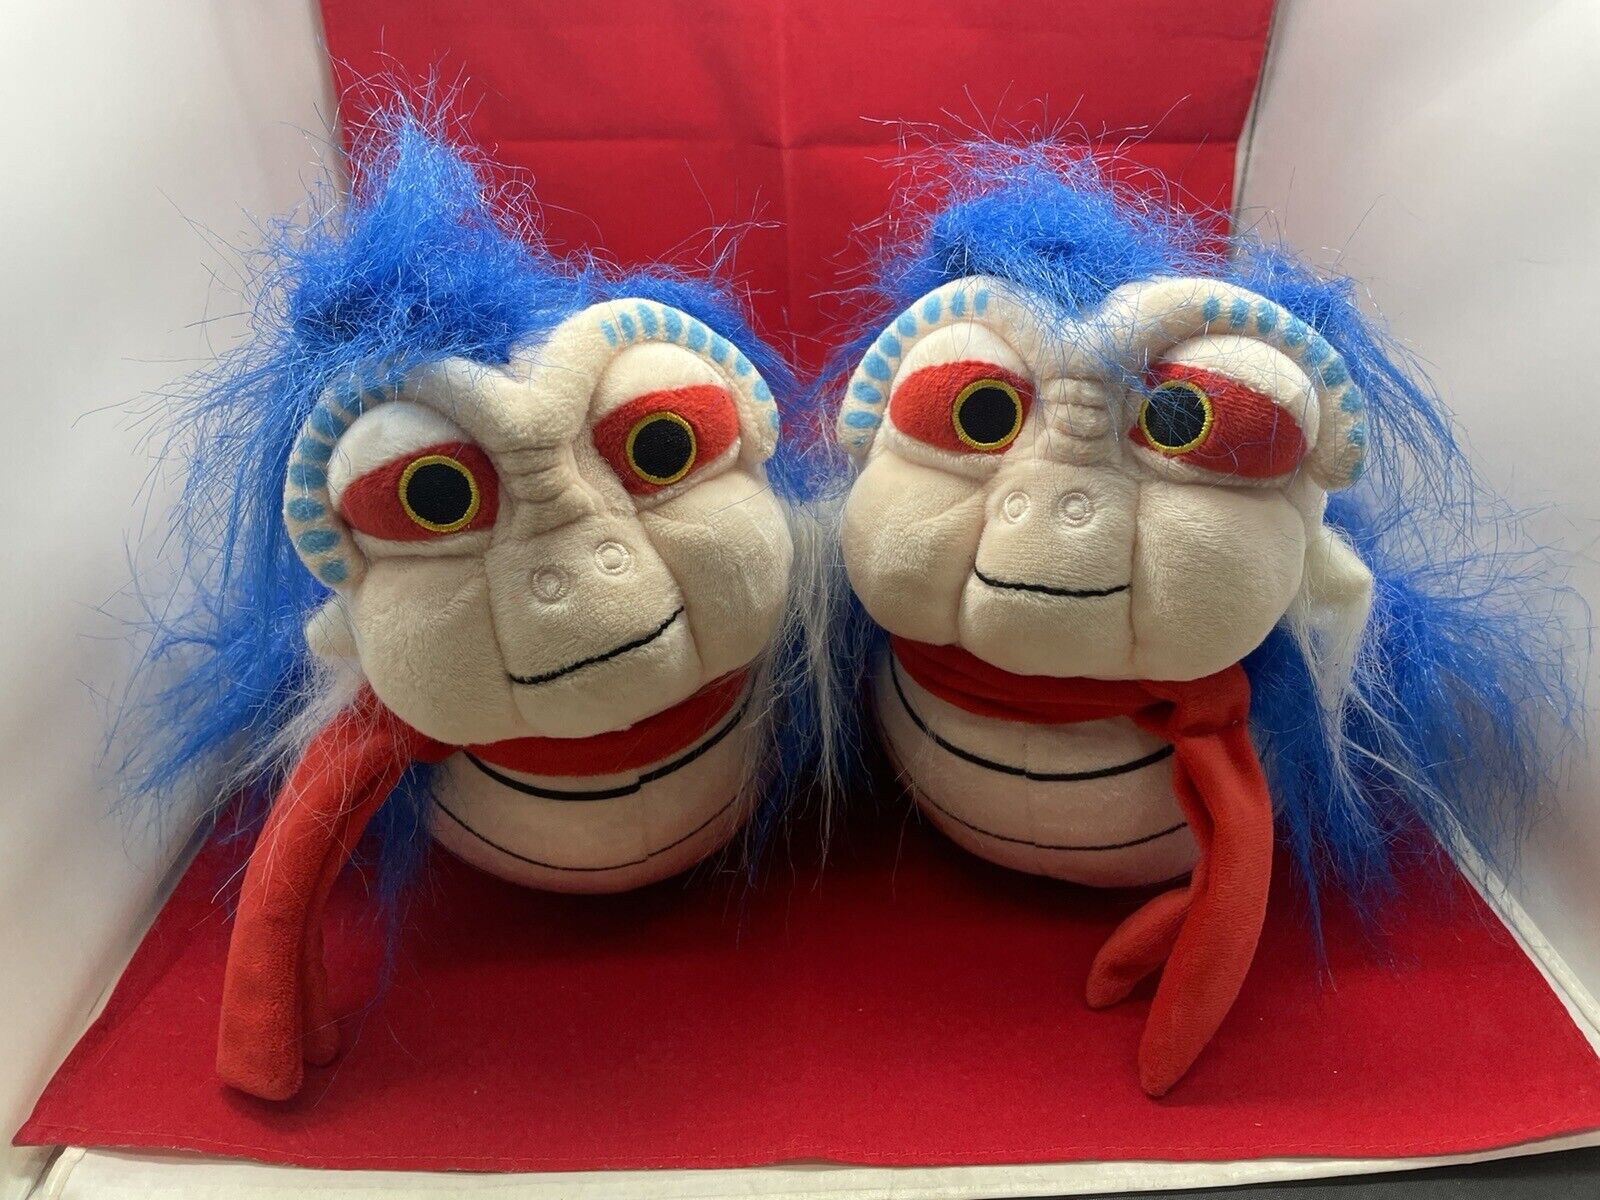 Labyrinth Ello Worm Plush Slippers for Adults Fits like Women’s 7/8